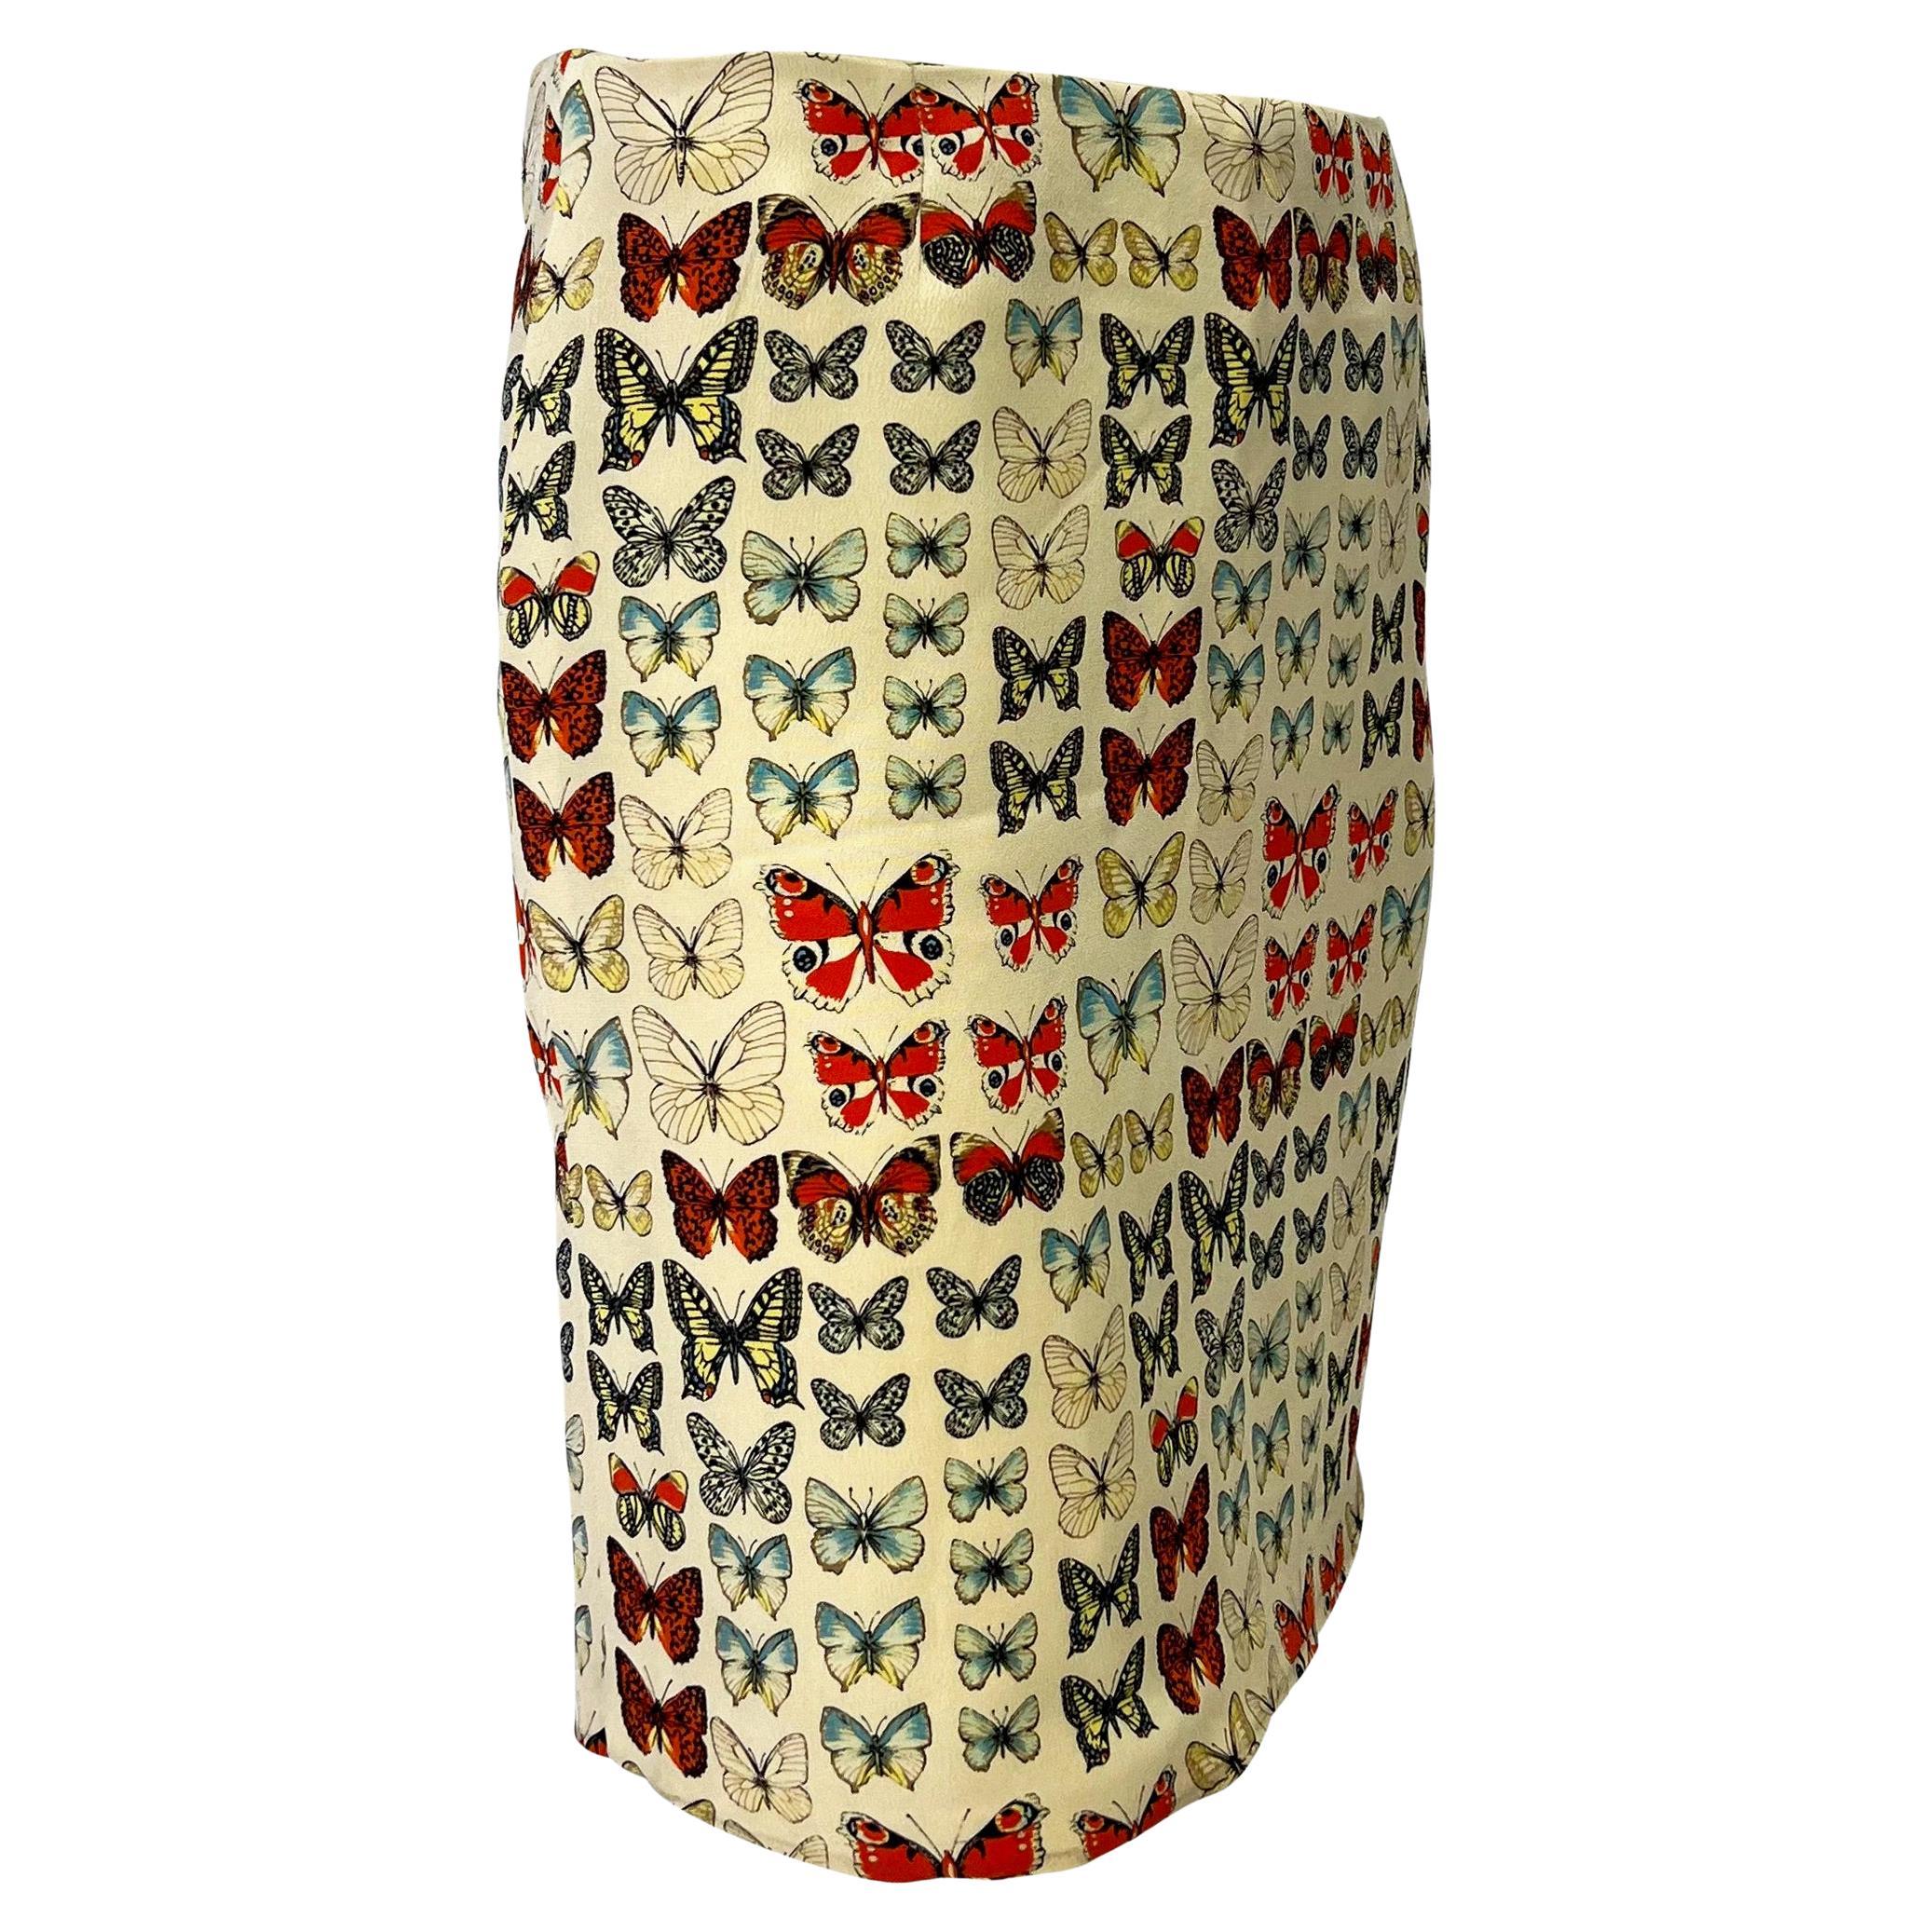 S/S 1995 Gianni Versace Couture Butterfly Moth Print Cream Mini Skirt For Sale 2